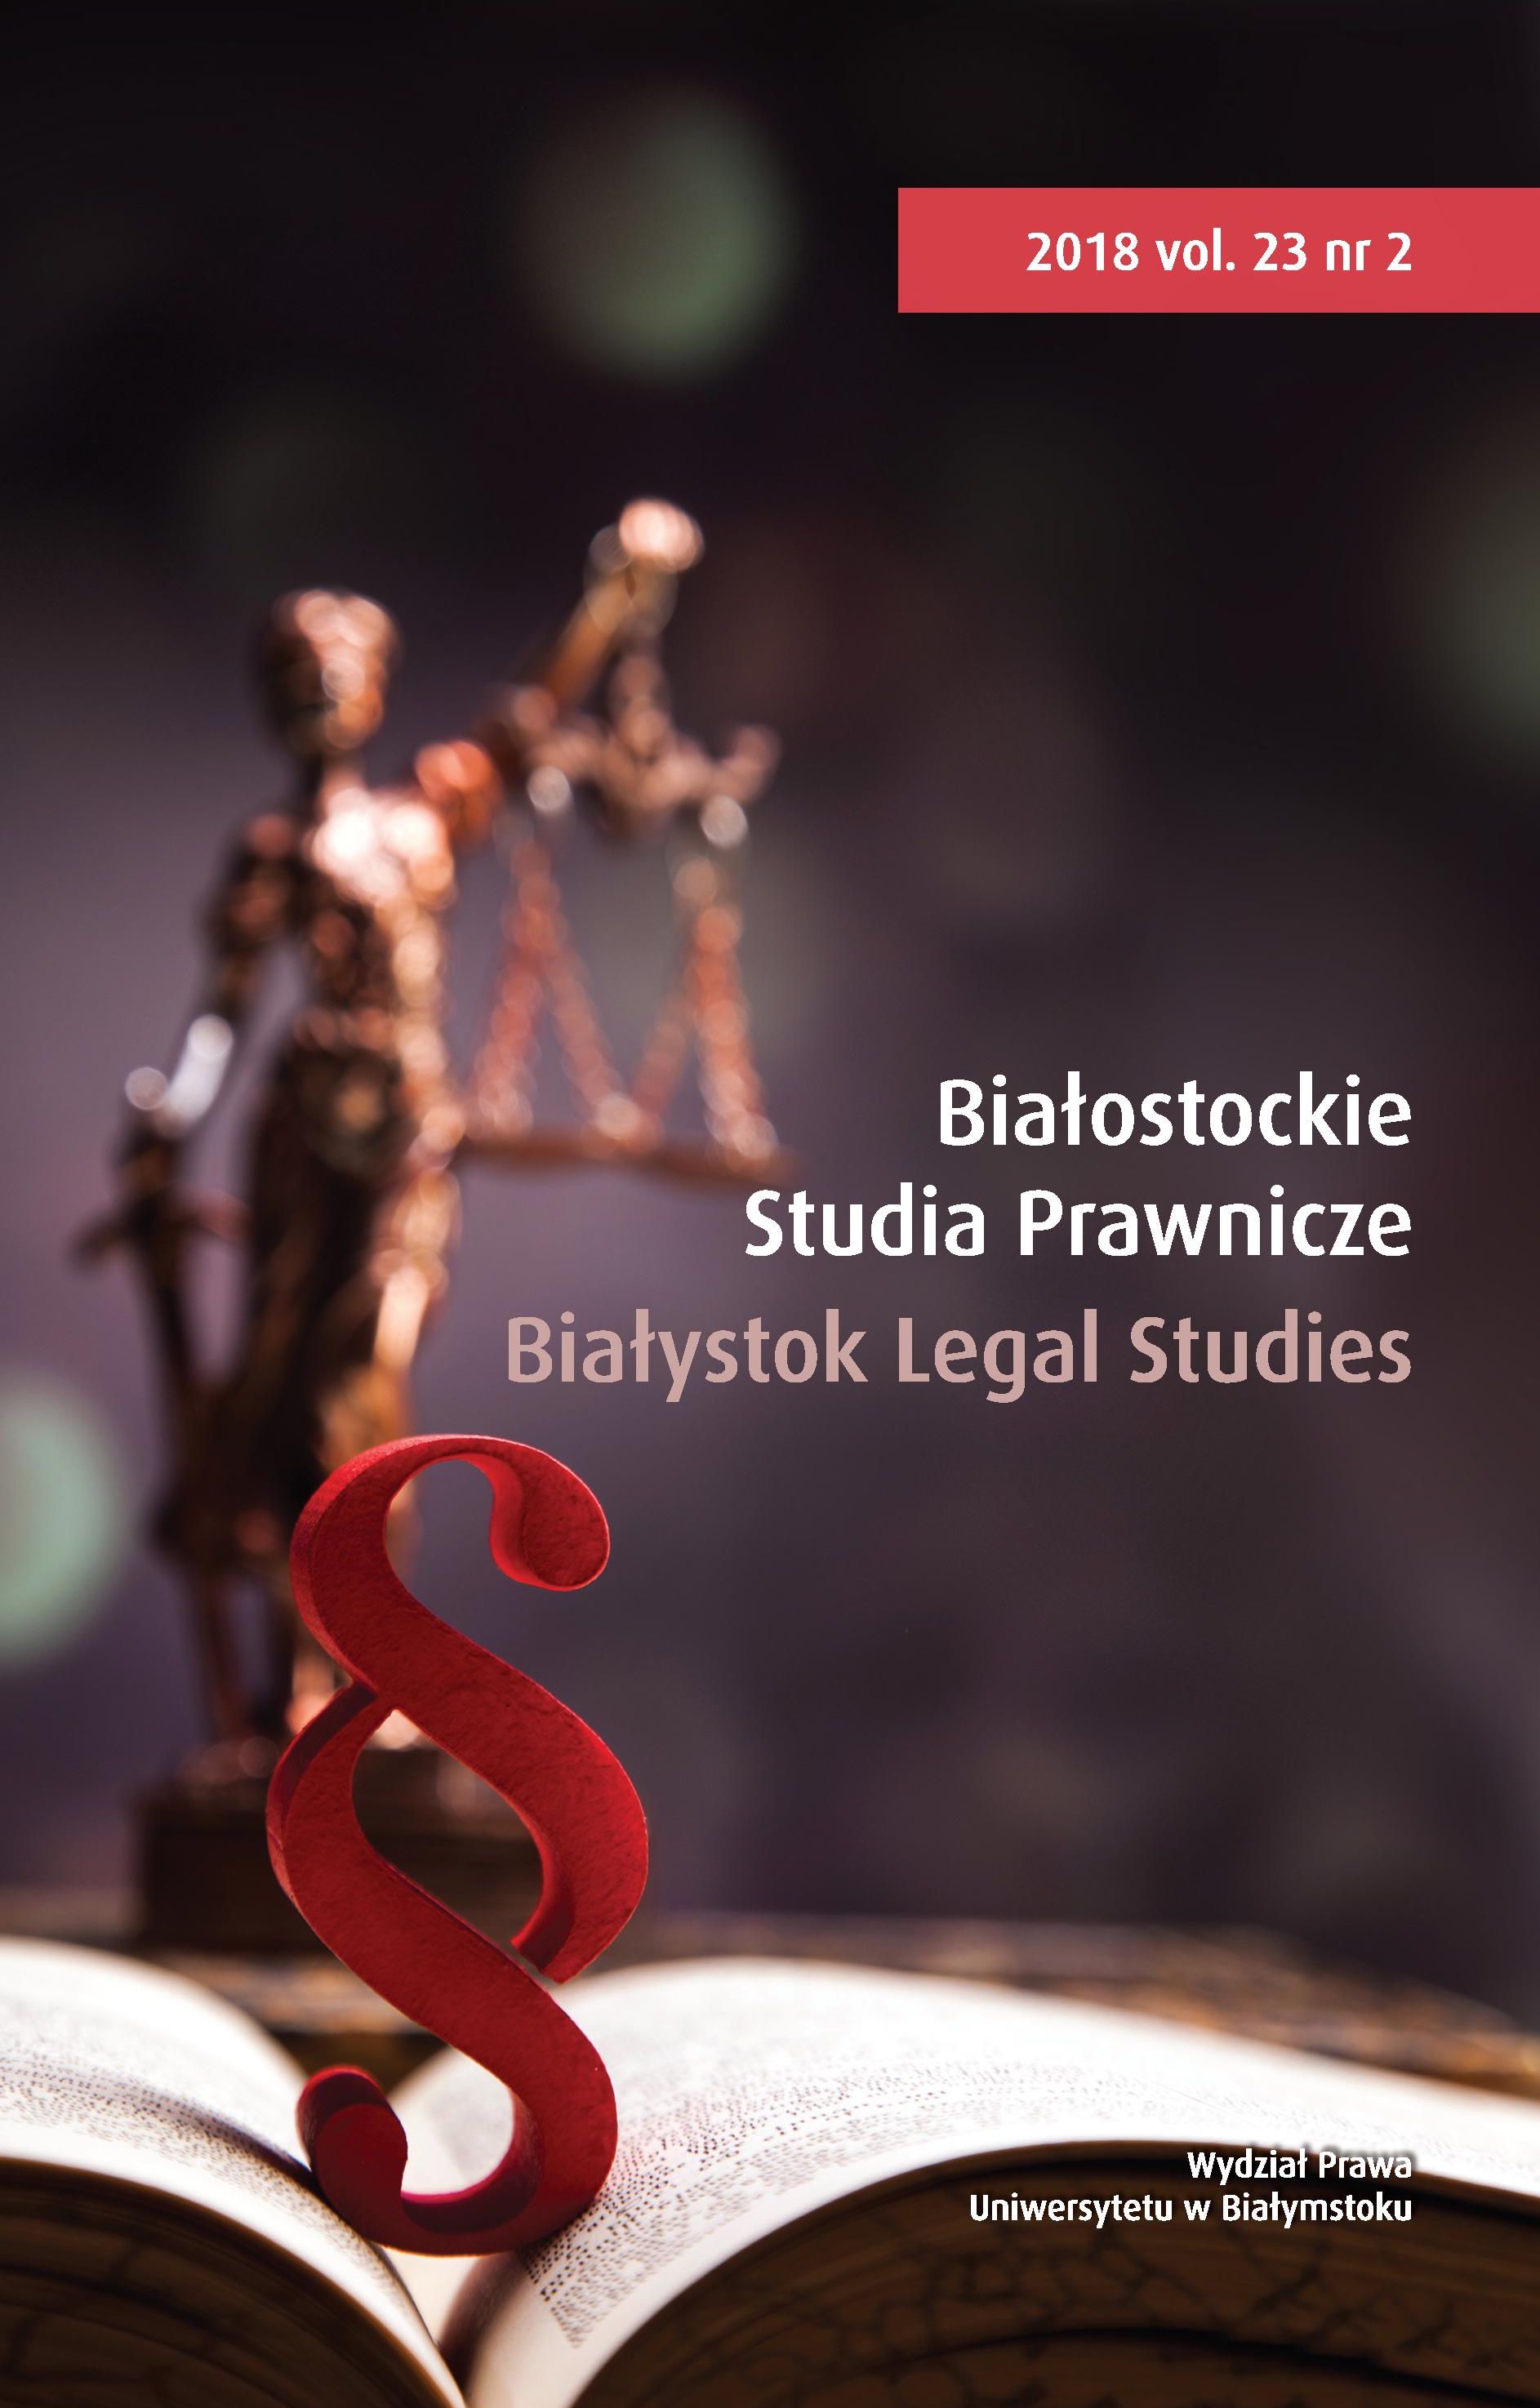 General Data Protection Regulation (GDPR) – The EU Law Strengthening the Information Society in Poland